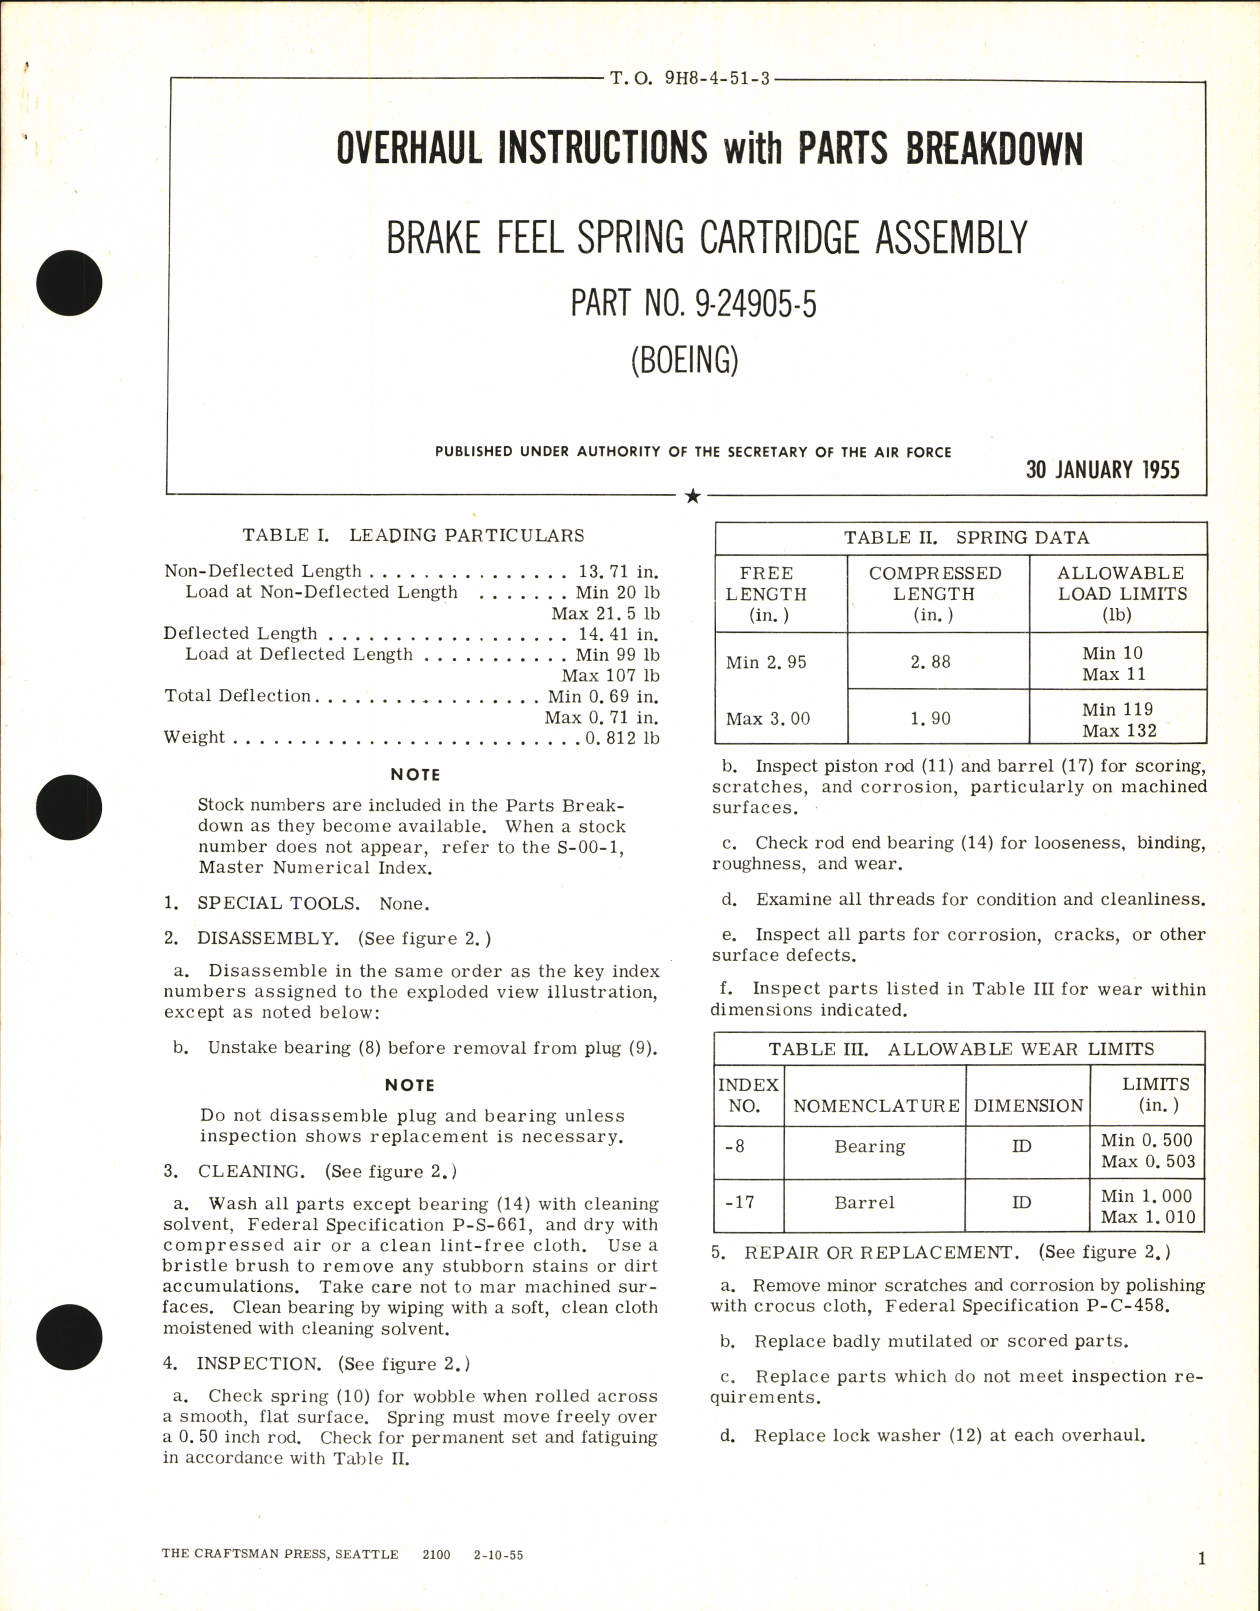 Sample page 1 from AirCorps Library document: Overhaul Instructions with Parts Breakdown for Brake Feel Spring Cartridge Assembly Part No. 9-24905-5